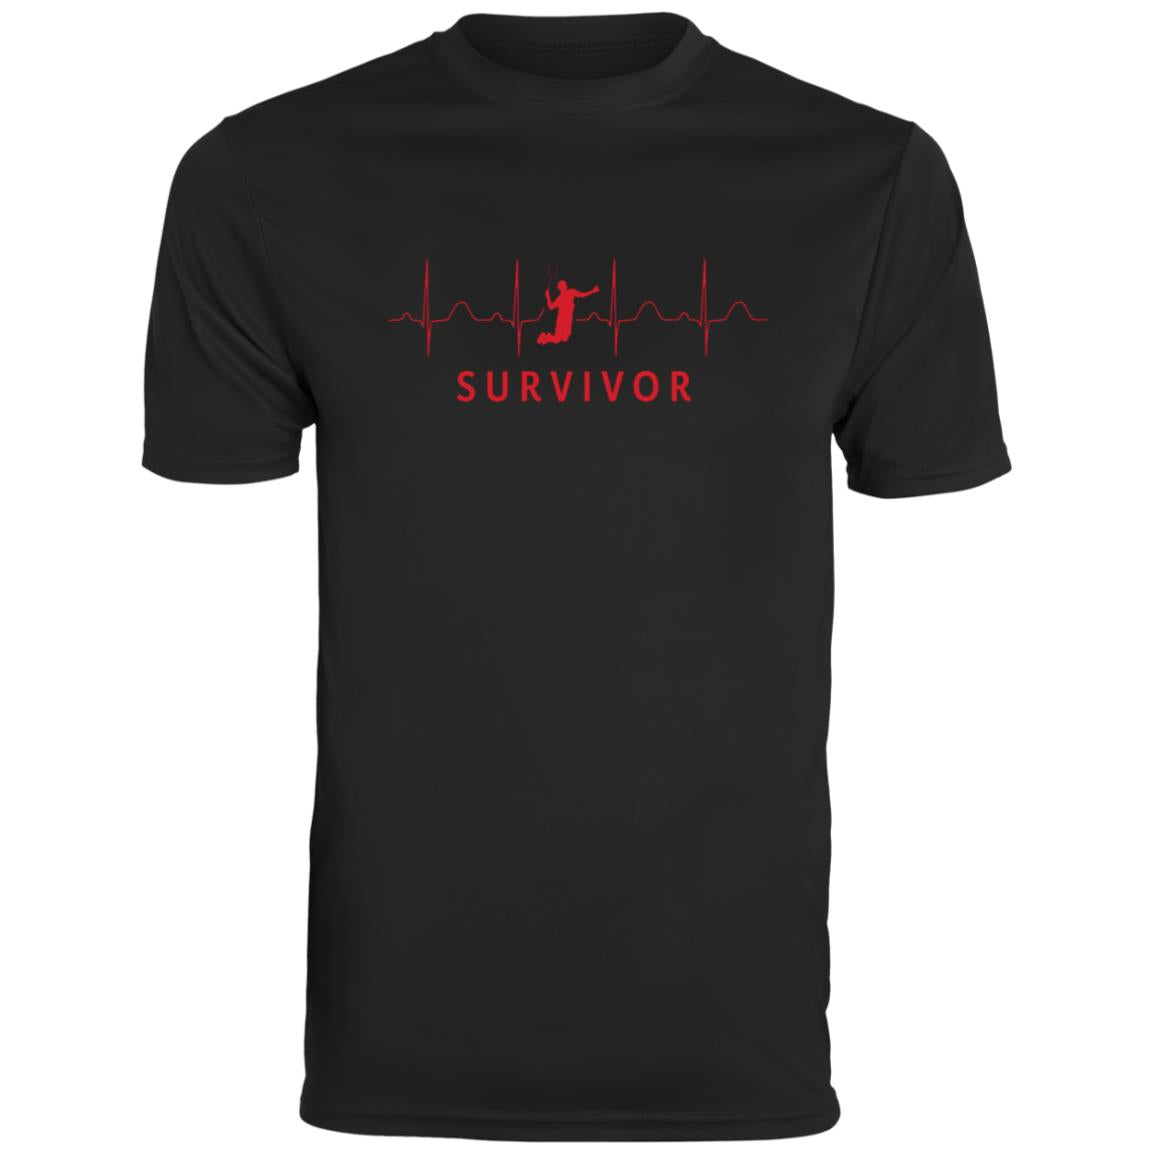 Black tee with "SURVIVOR" text along with a tennis player icon with EKG lines behind.